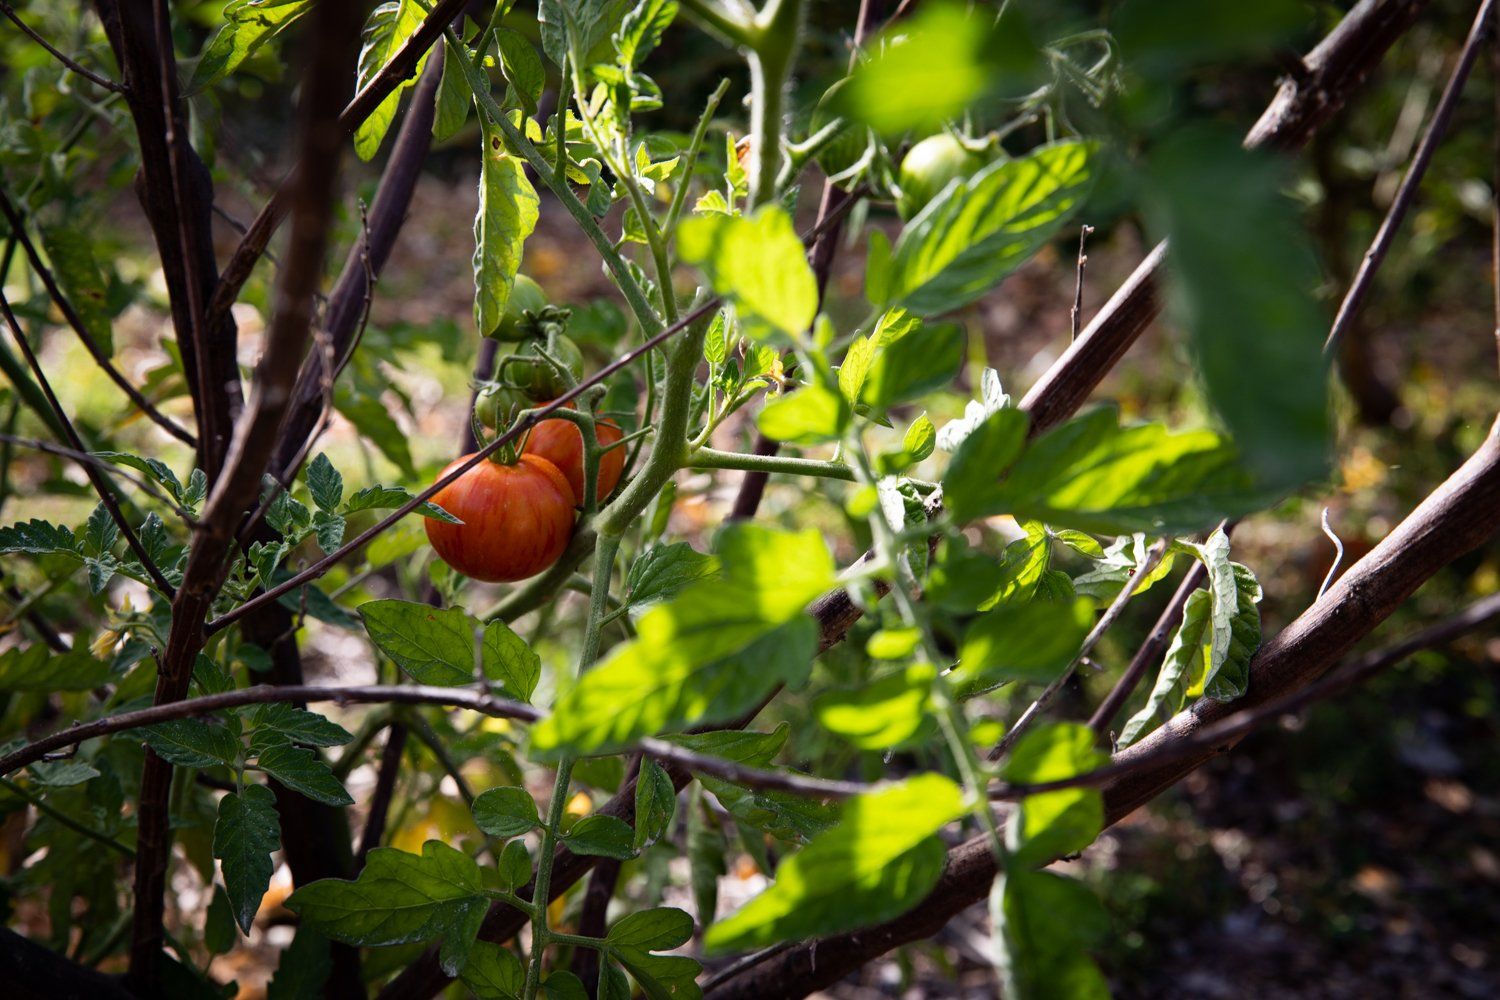 Tomatoes at the Aloha Food Forest Image